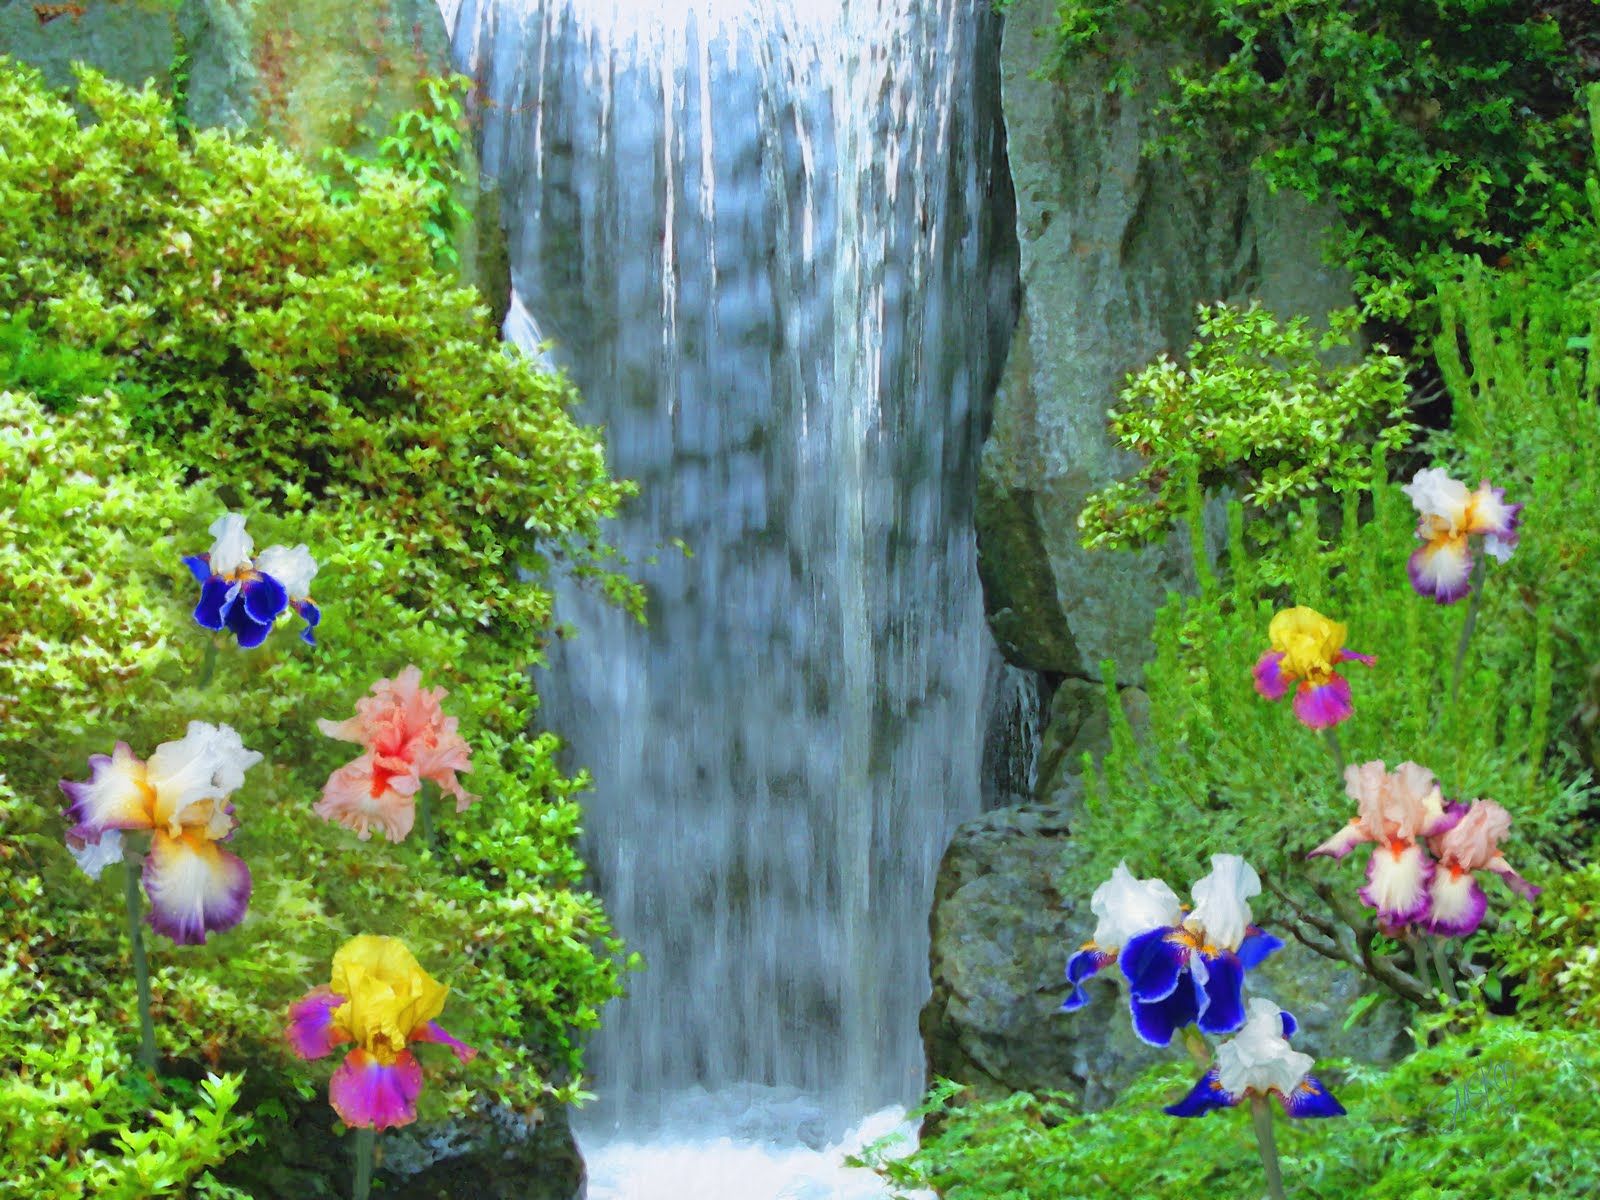 All The Colors Of The Iris Flower.. Artists Original Unusual Art: Painting Of Waterfall With Ir. Waterfall Wallpaper, Waterfall Paintings, Waterfall Picture